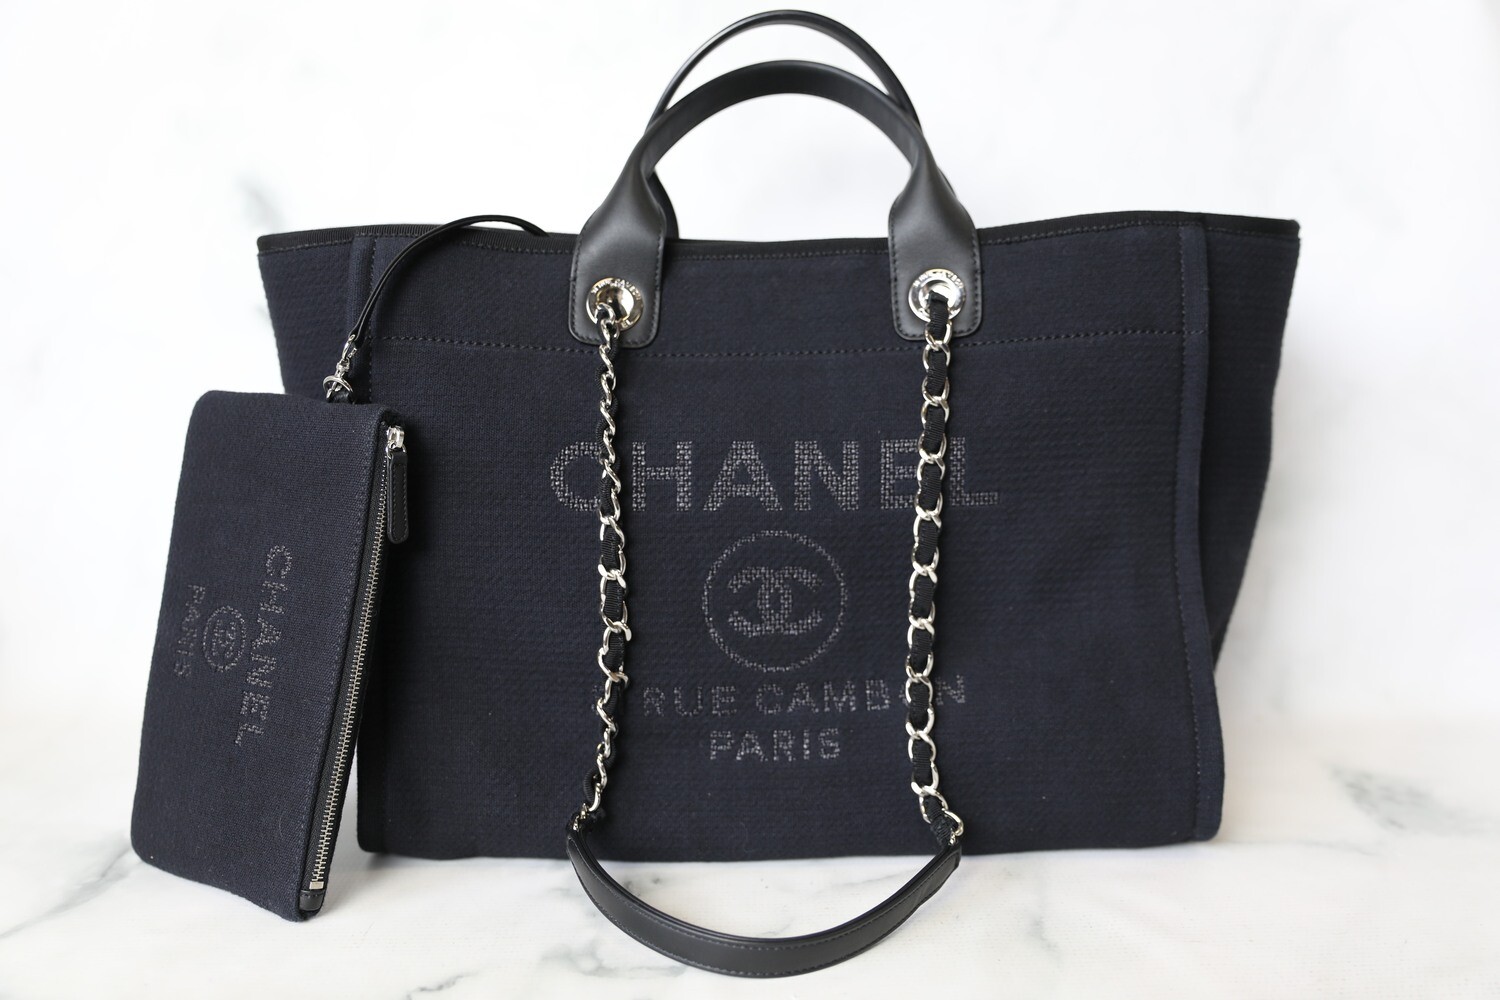 Chanel Deauville Tote Large, Black Canvas with Silver Hardware